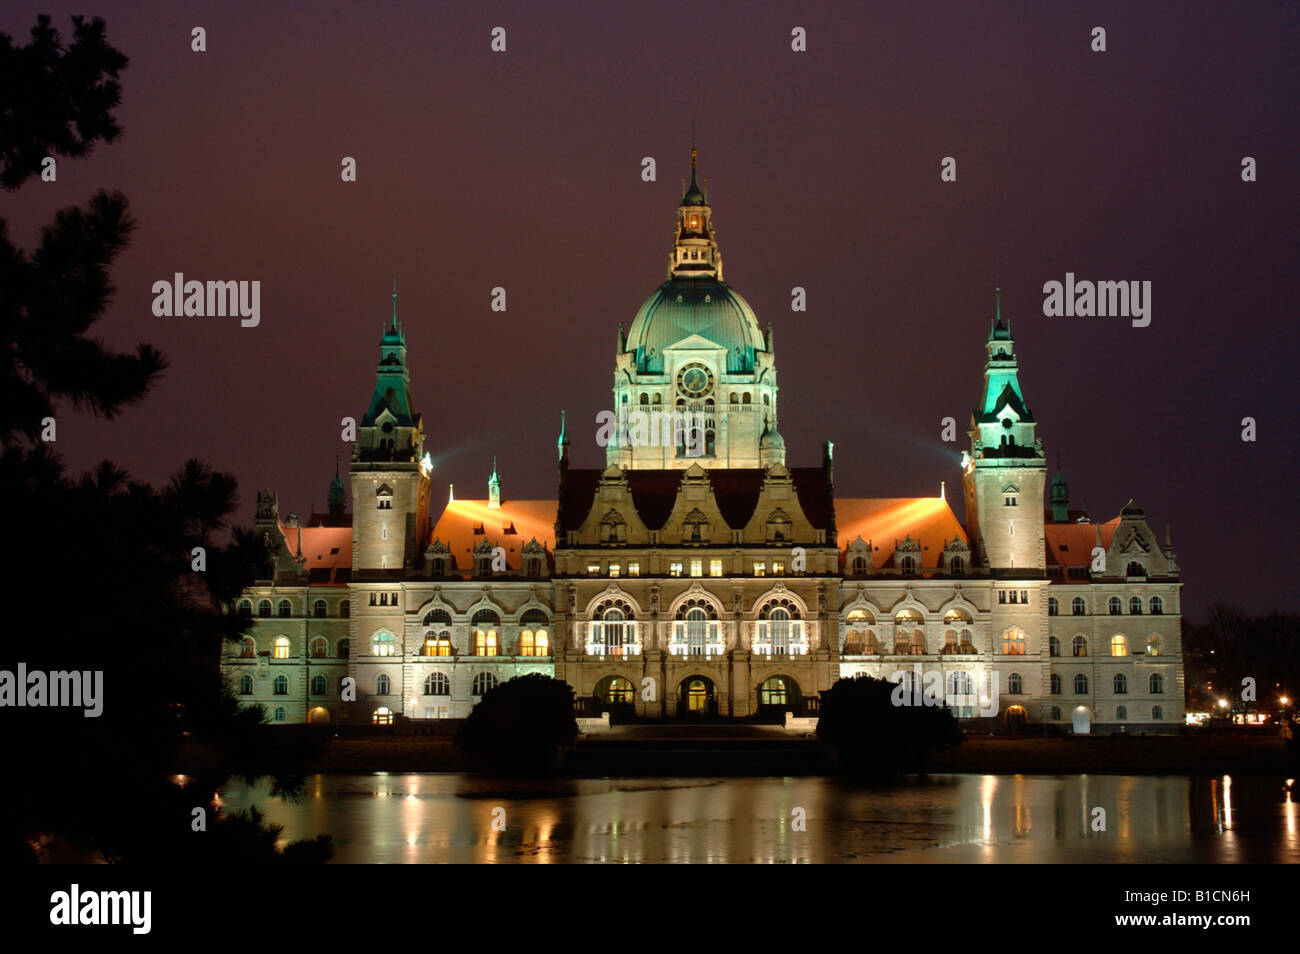 illumination at city hall, in the front the Maschteich, Masch pond, Germany, Lower Saxony, Hanover Stock Photo